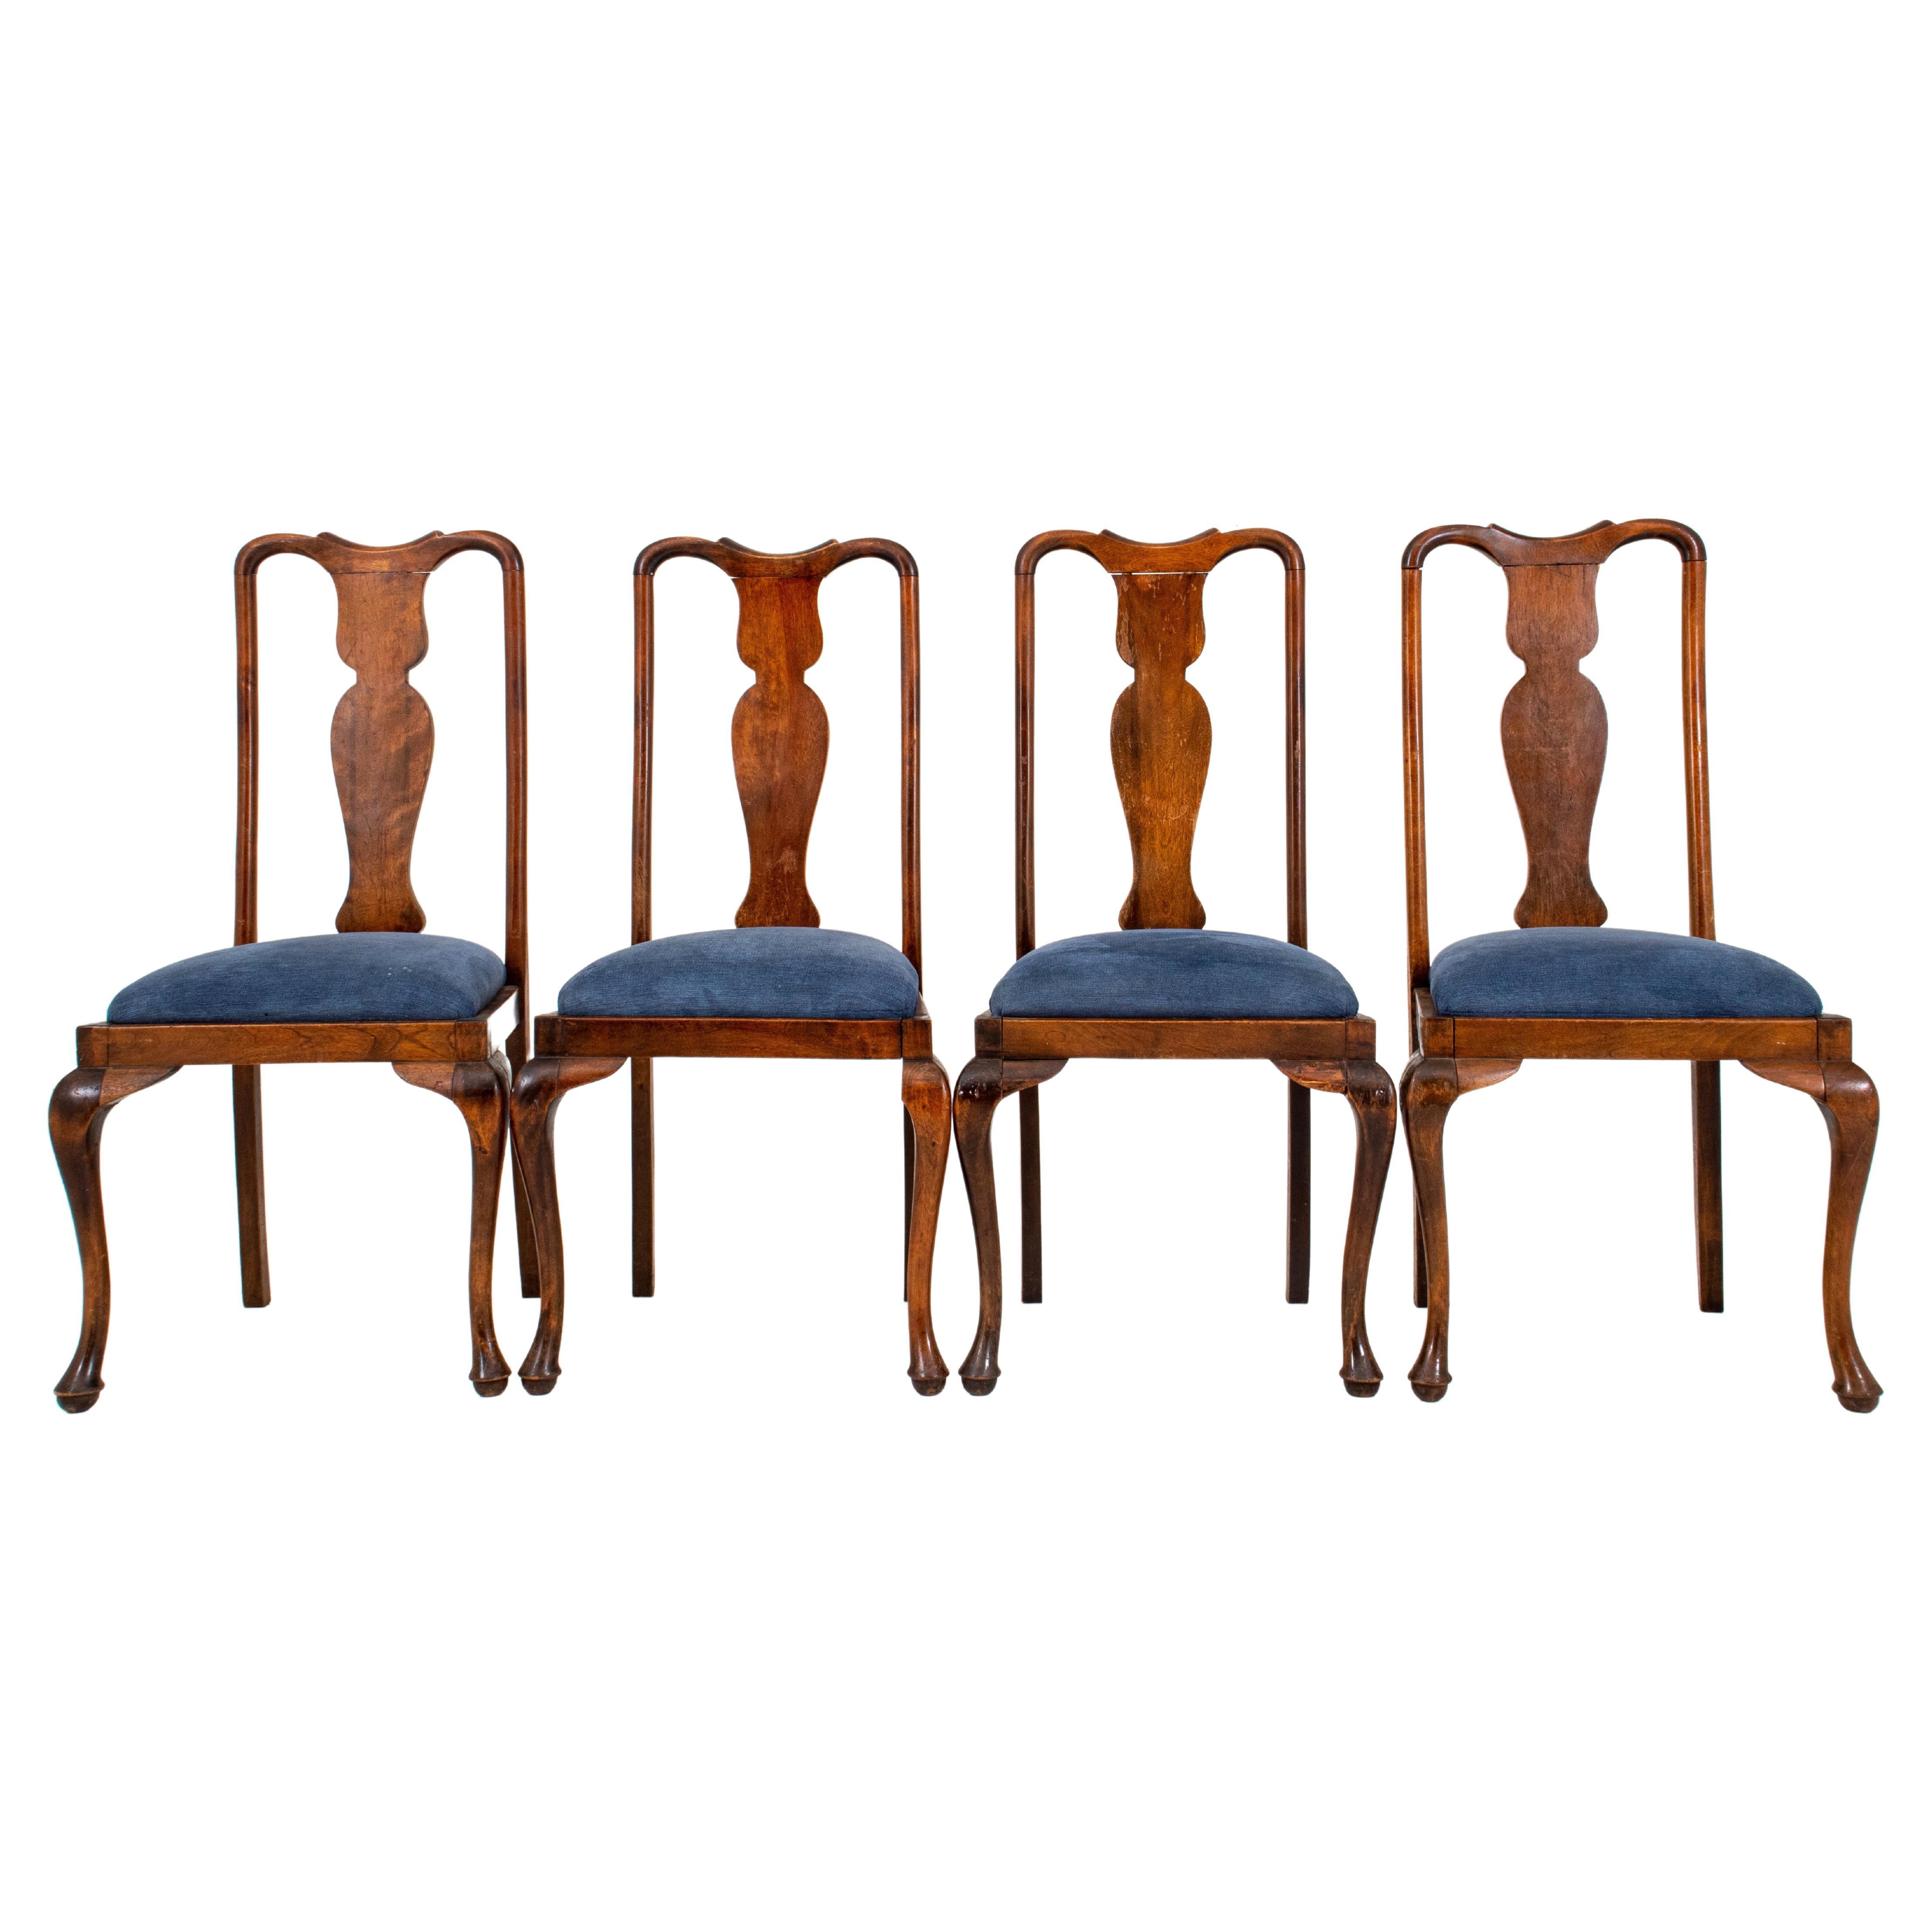 Queen Anne Style Dining Chairs, 4